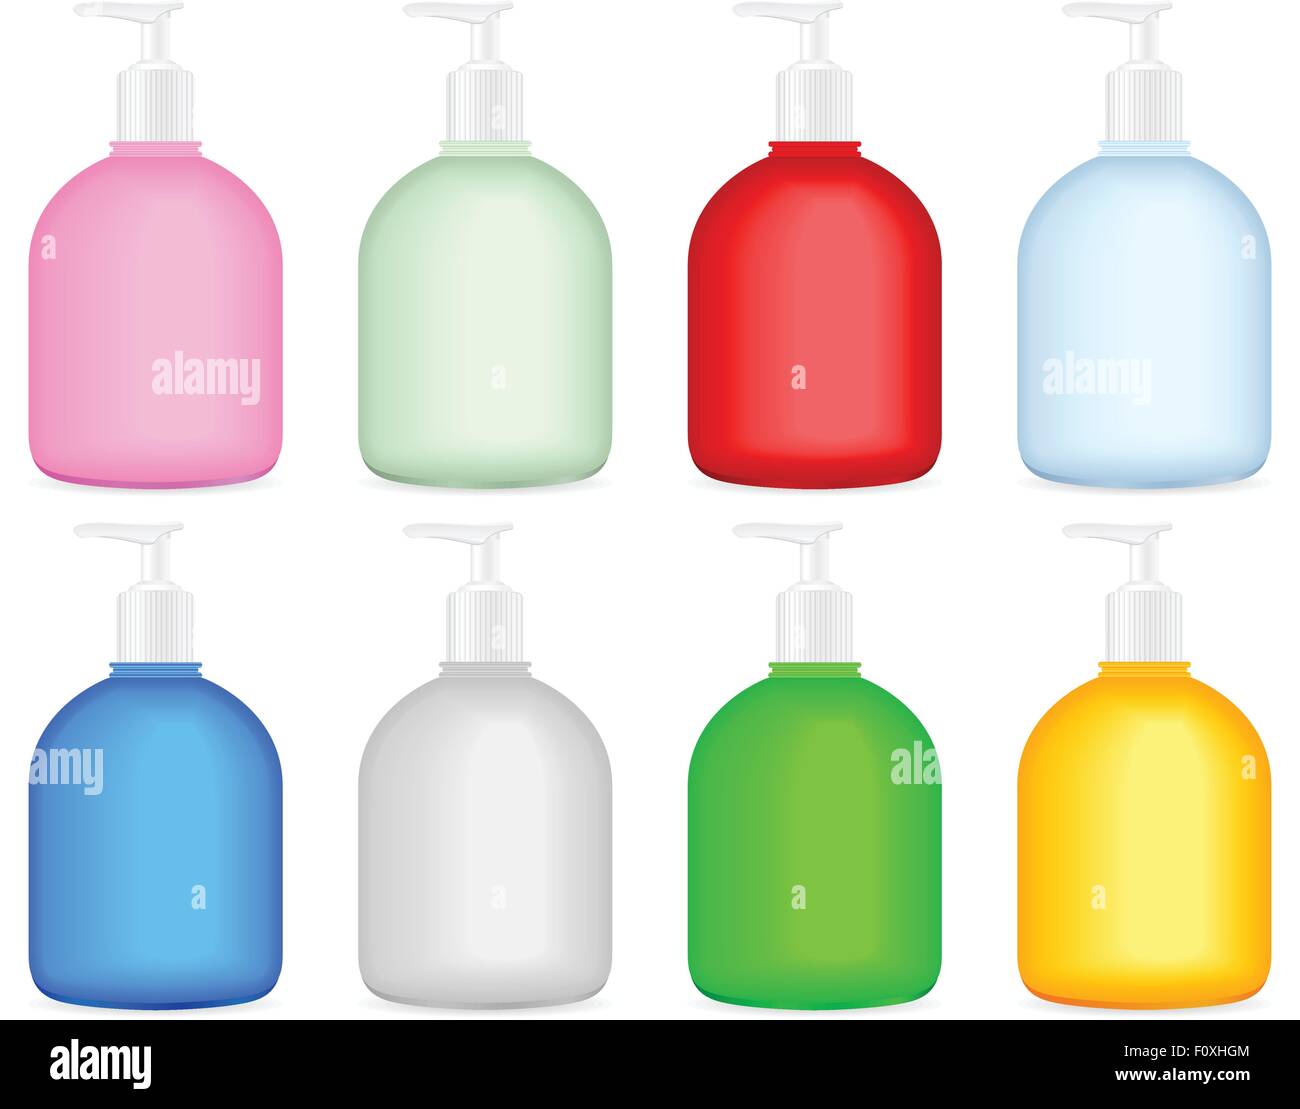 https://c8.alamy.com/comp/F0XHGM/liquid-soap-container-set-on-a-white-background-vector-illustration-F0XHGM.jpg